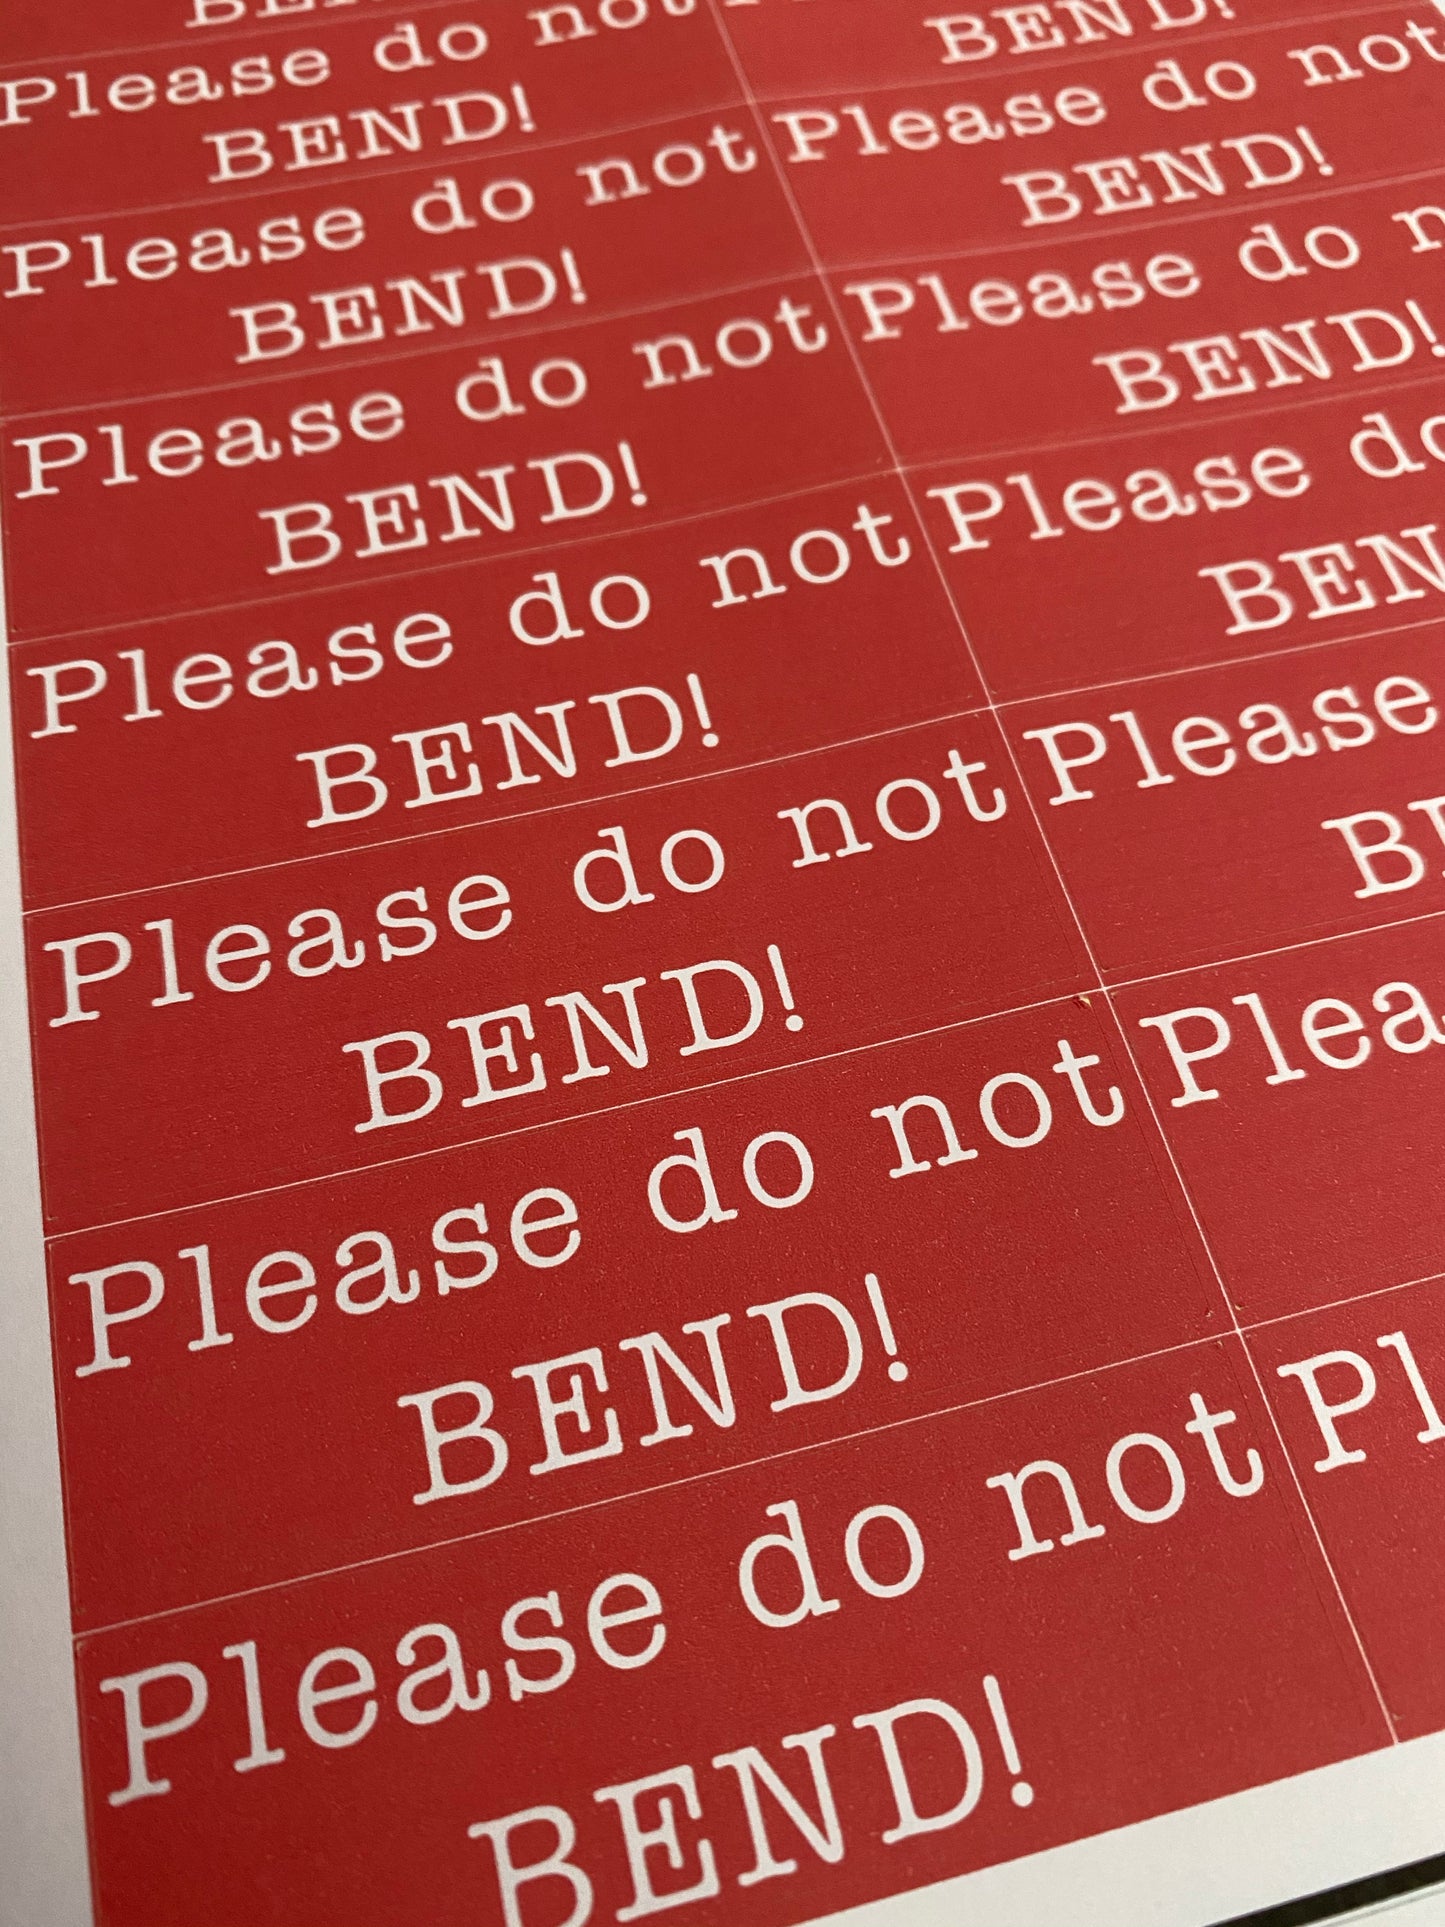 Please do not bend stickers